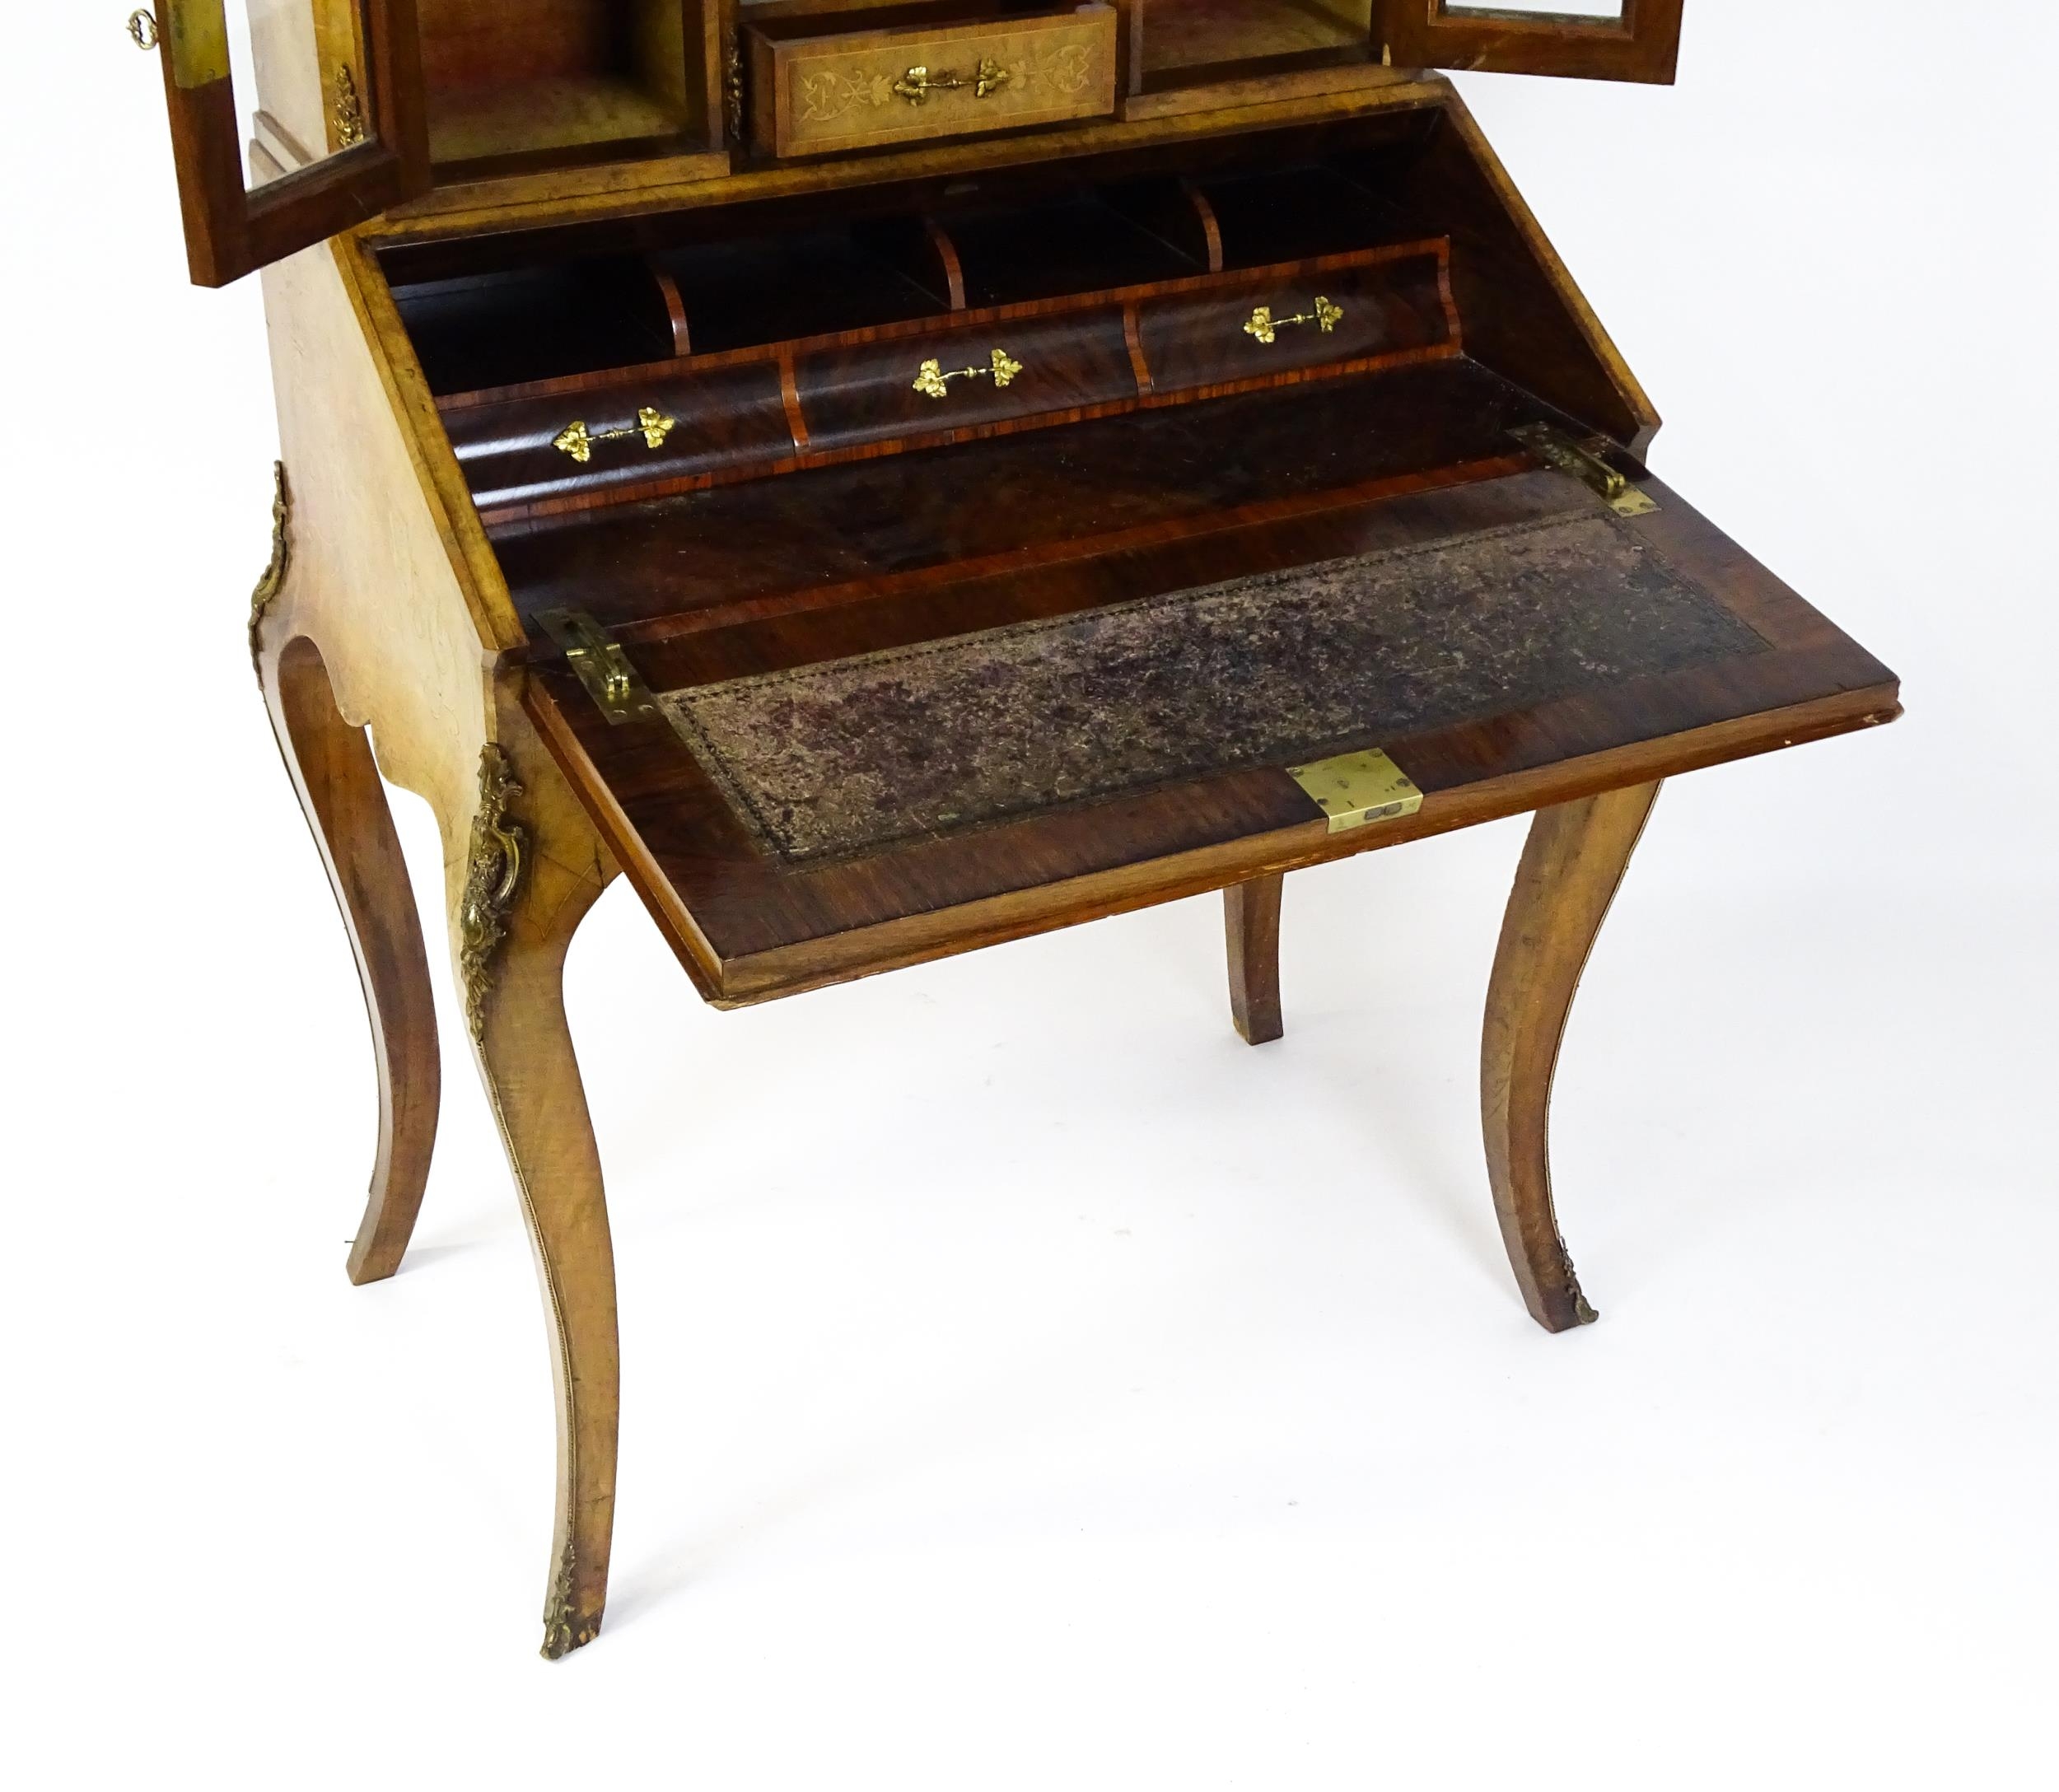 A 19thC burr walnut Bonheur du jour with a mirrored back stand and flanked by two glazed cabinets - Image 8 of 11